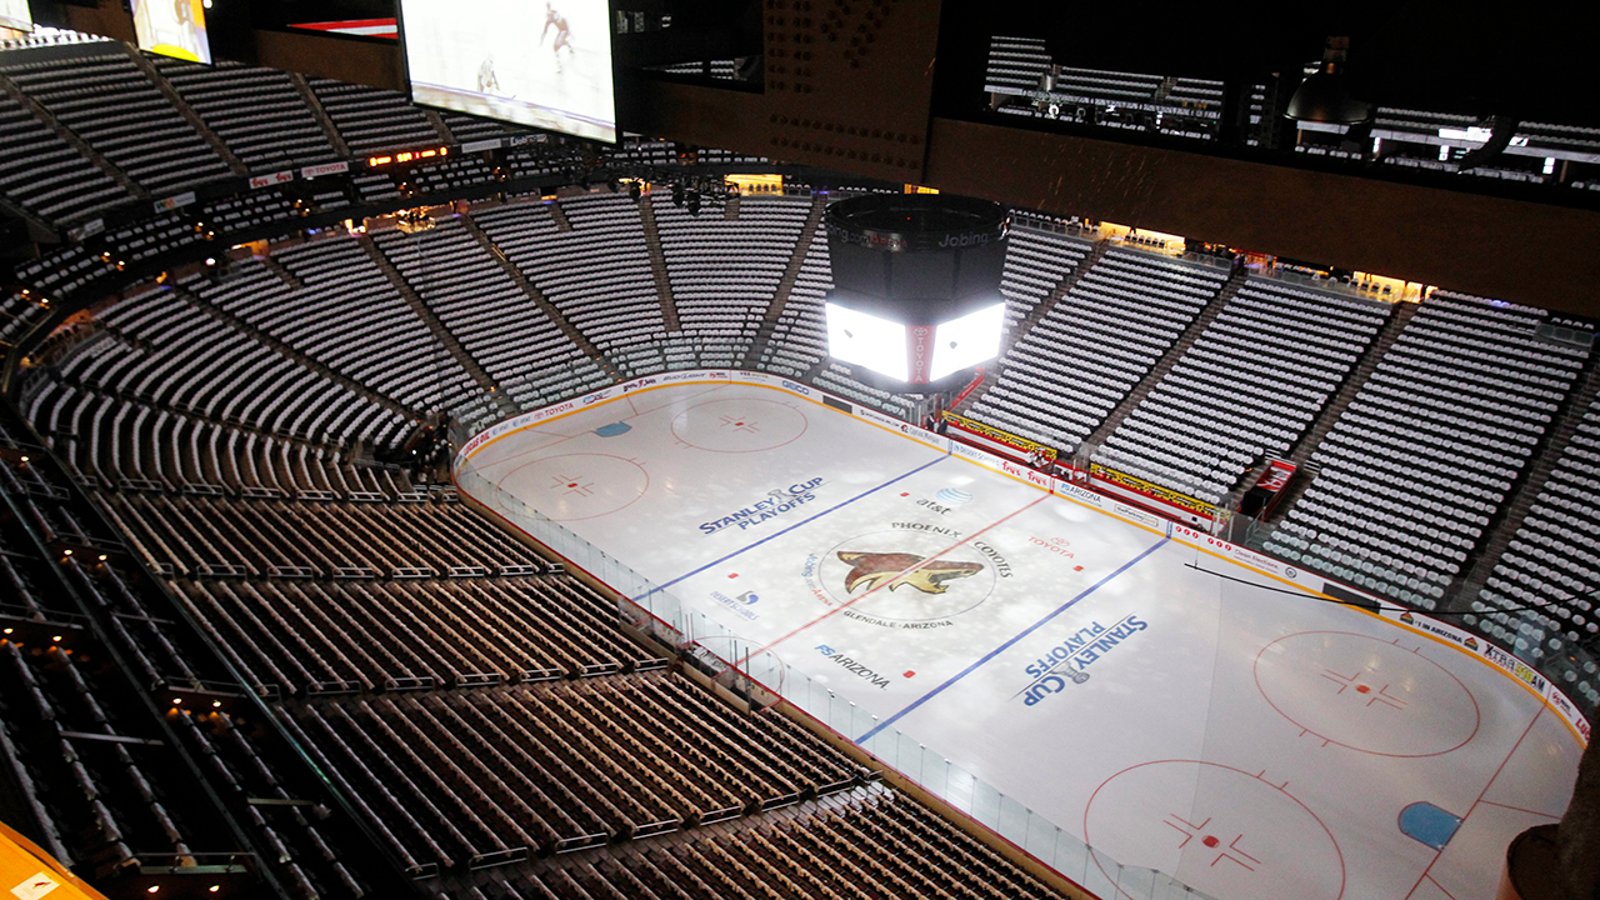 The truth comes out on Coyotes’ real arena as insider refutes “sensationalized” reports!